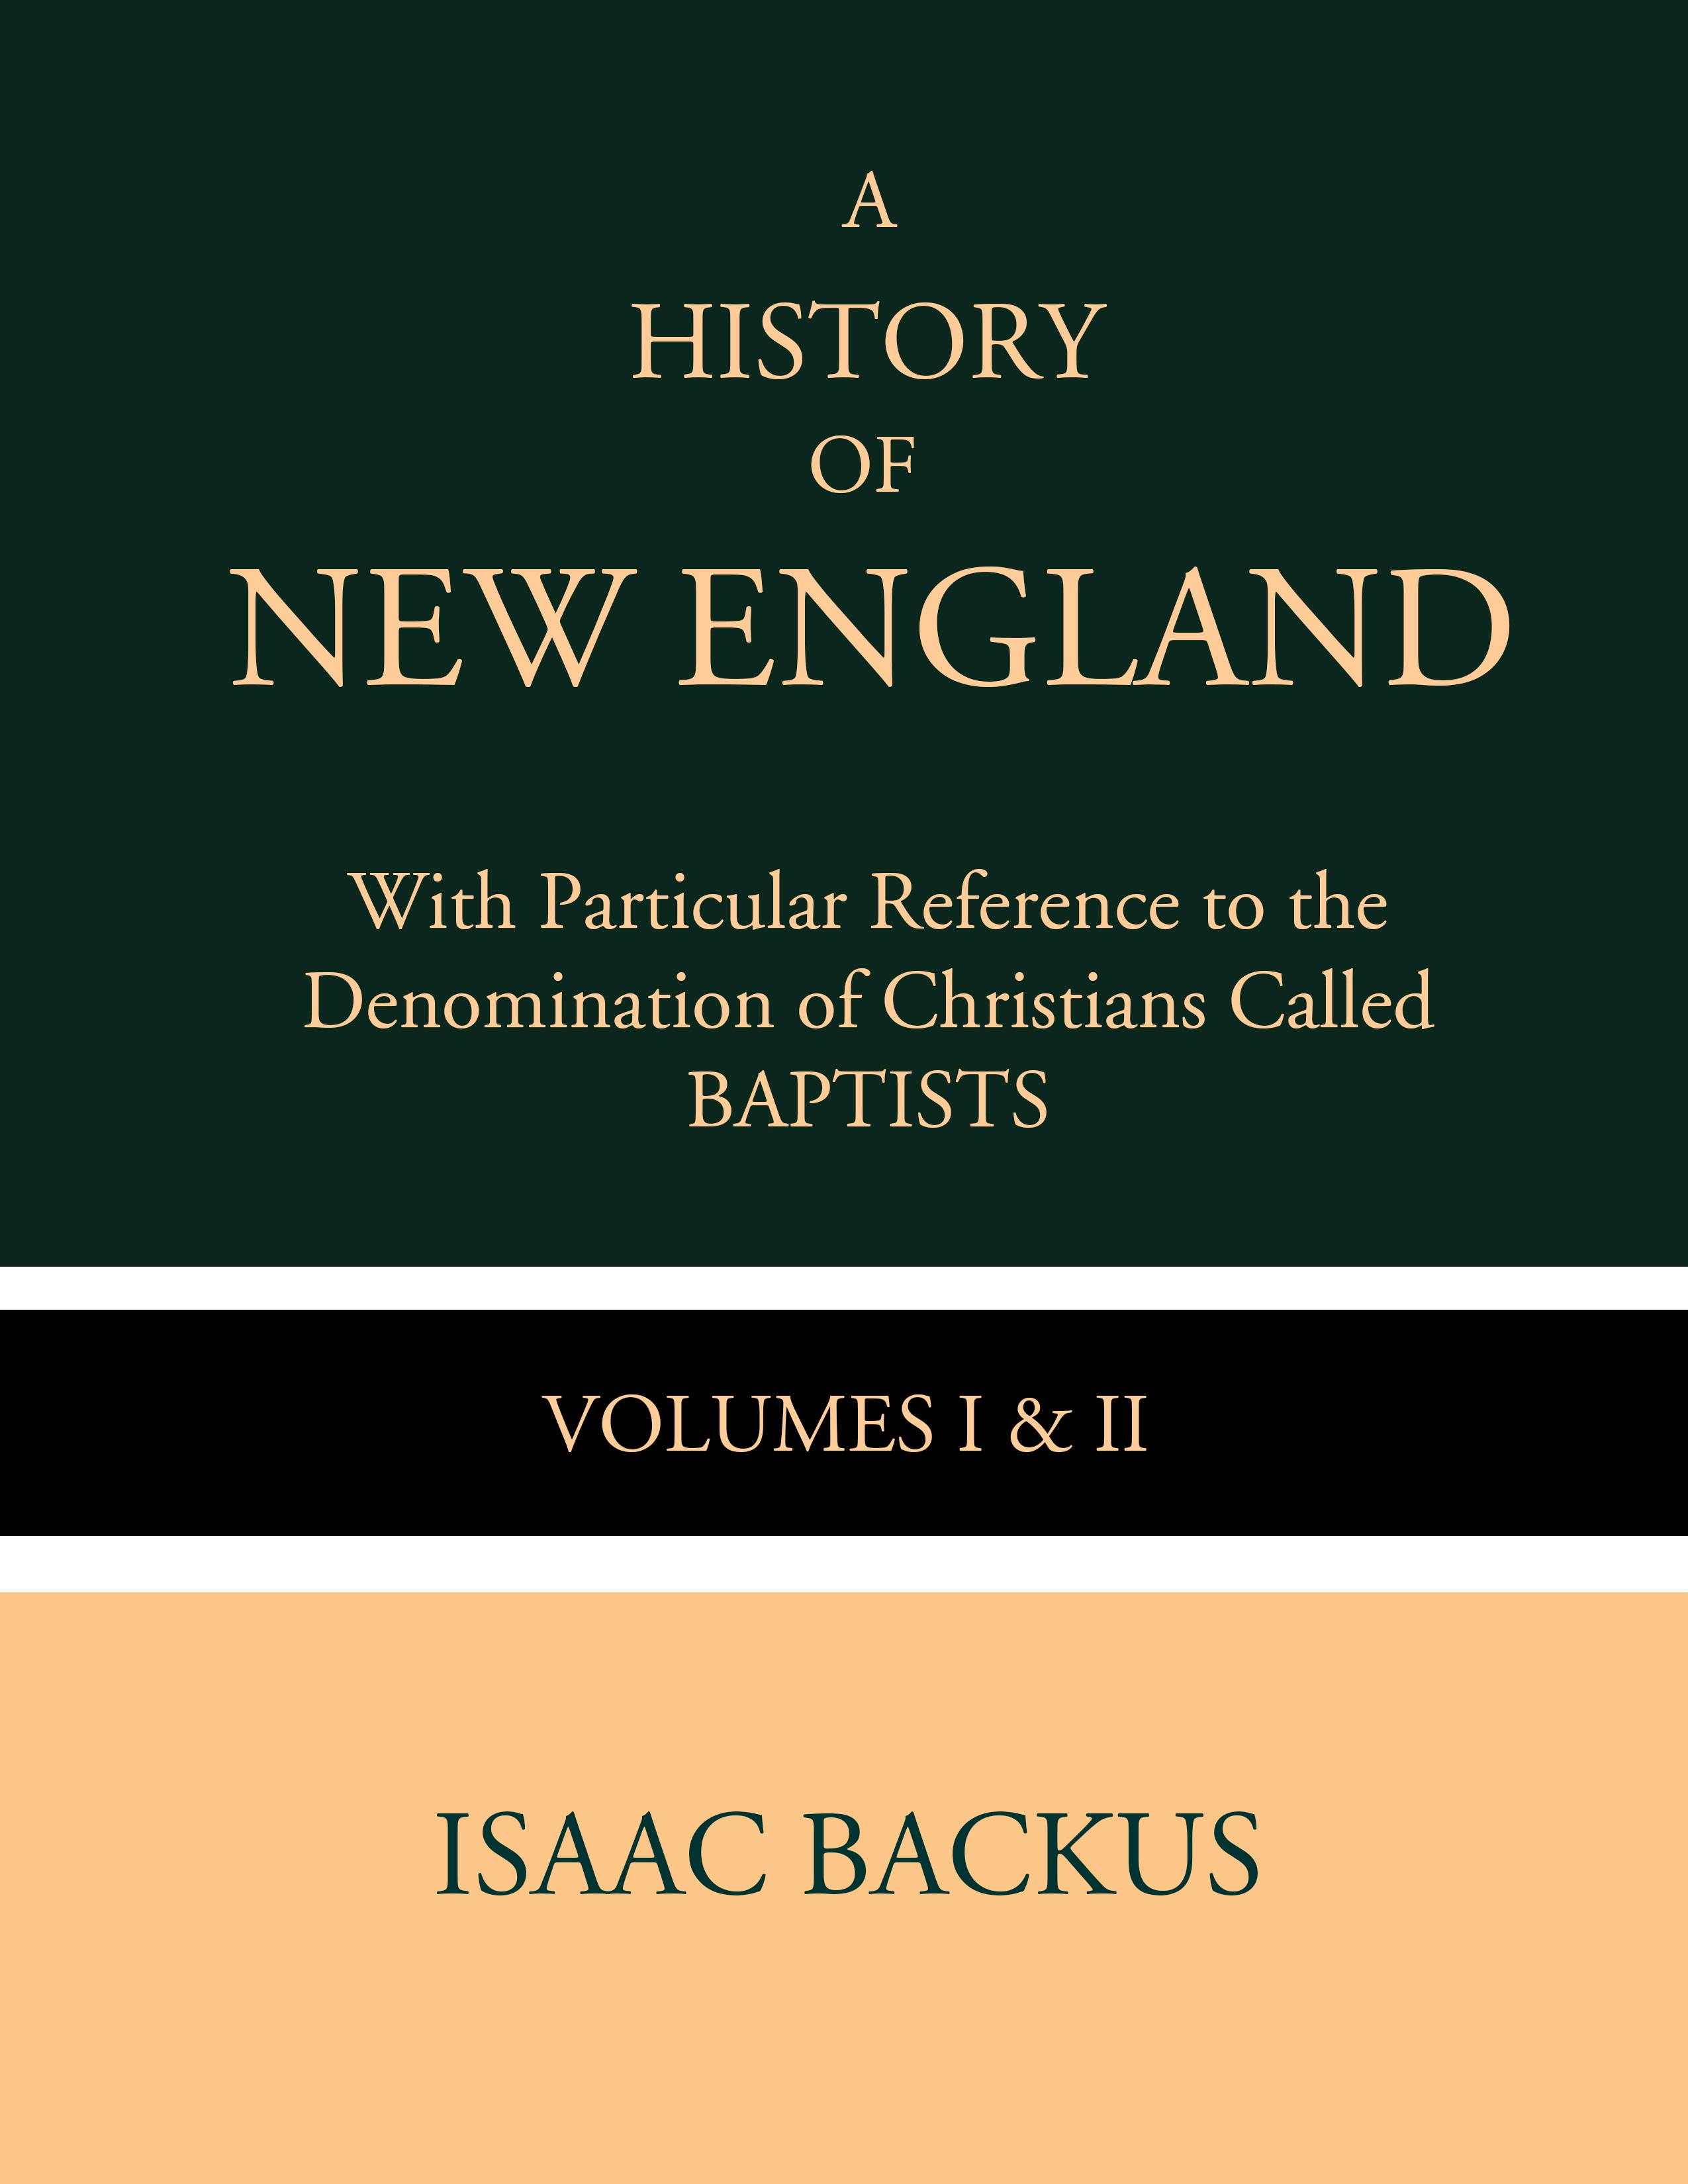 A History of New England with Particular Reference to the Denomination of Christians Called Baptist - undefined